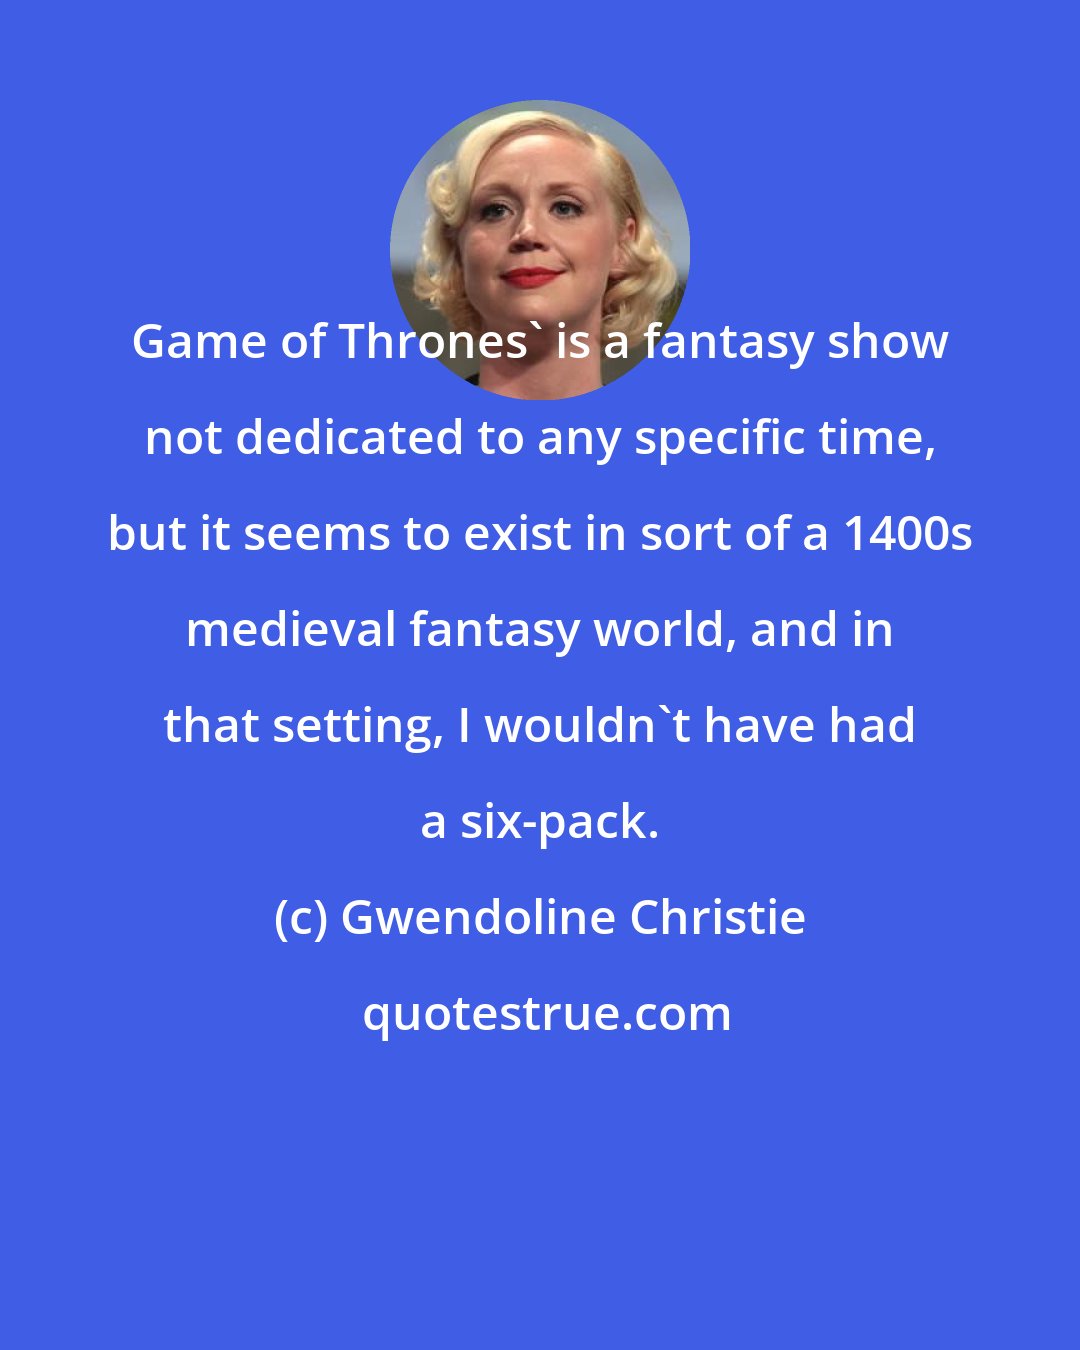 Gwendoline Christie: Game of Thrones' is a fantasy show not dedicated to any specific time, but it seems to exist in sort of a 1400s medieval fantasy world, and in that setting, I wouldn't have had a six-pack.